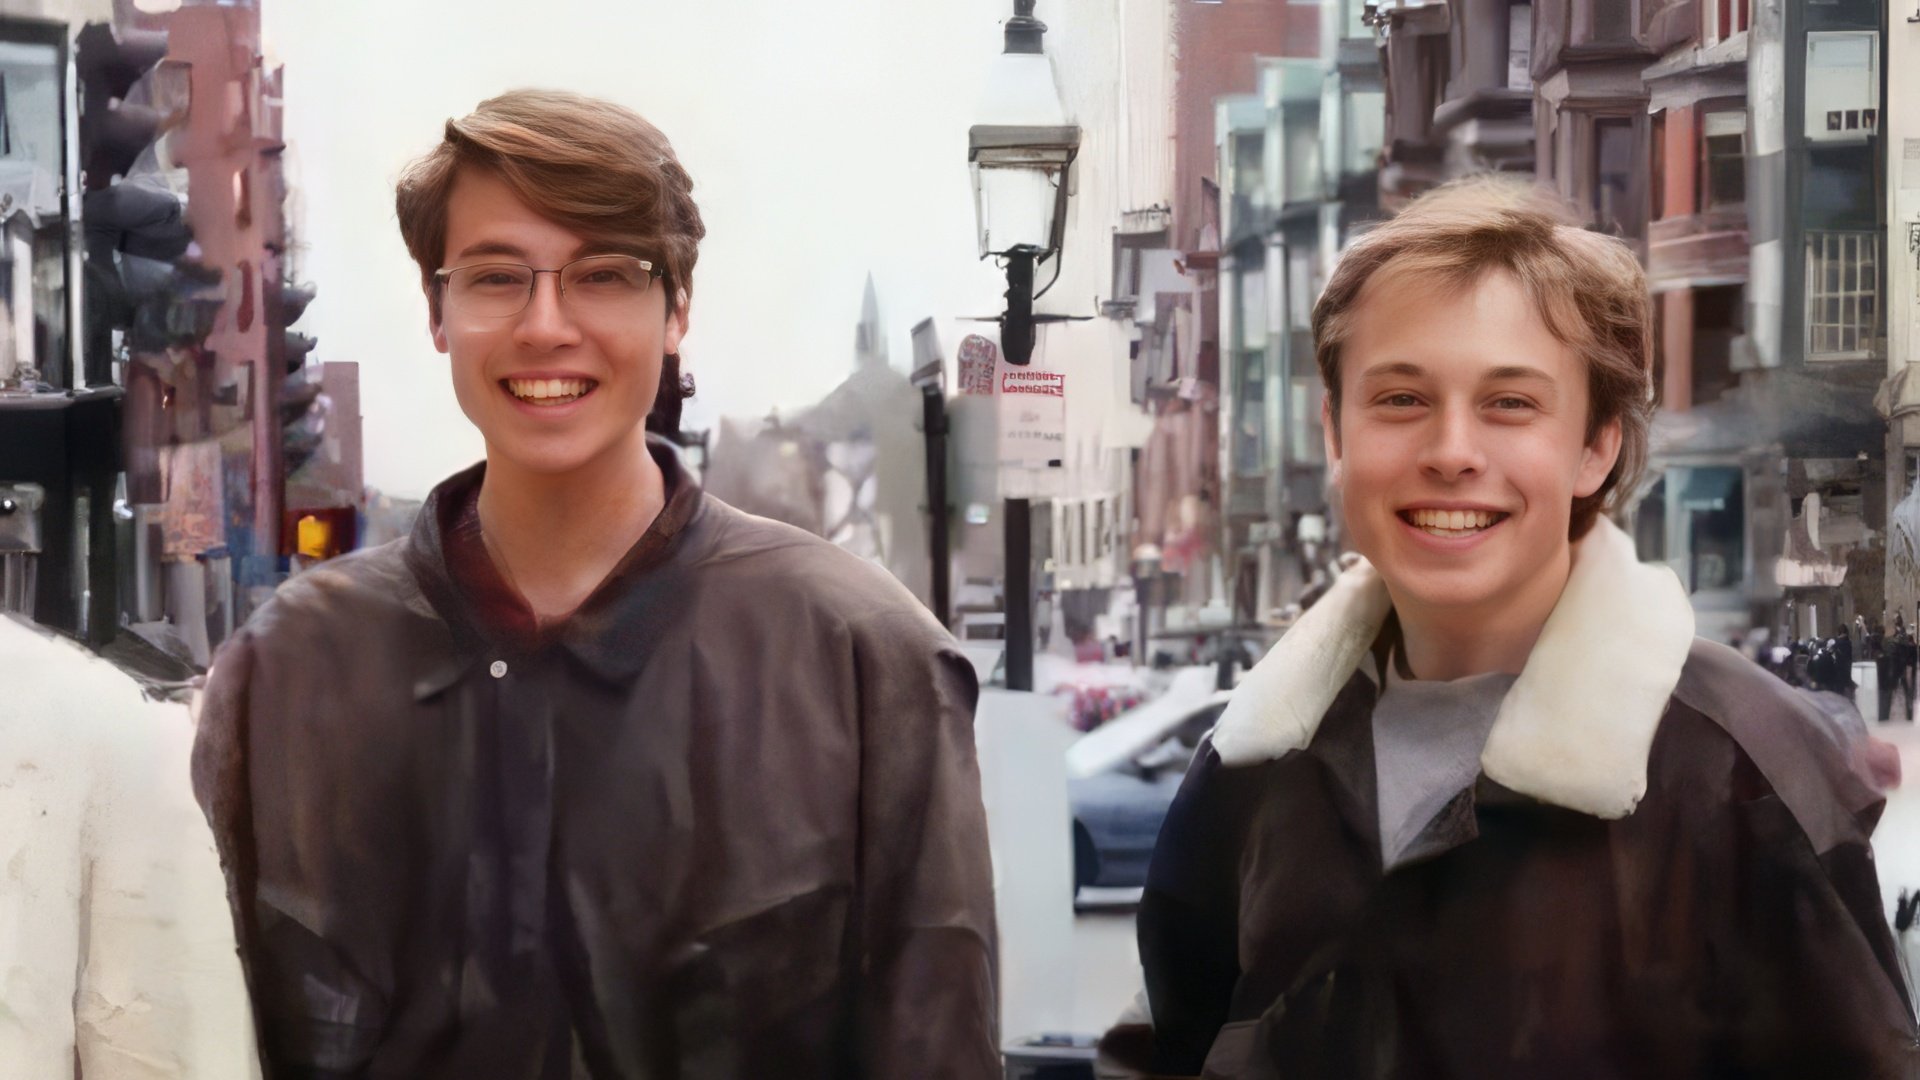 Elon Musk and his brother Kimbal at the beginning of the path to tremendous success